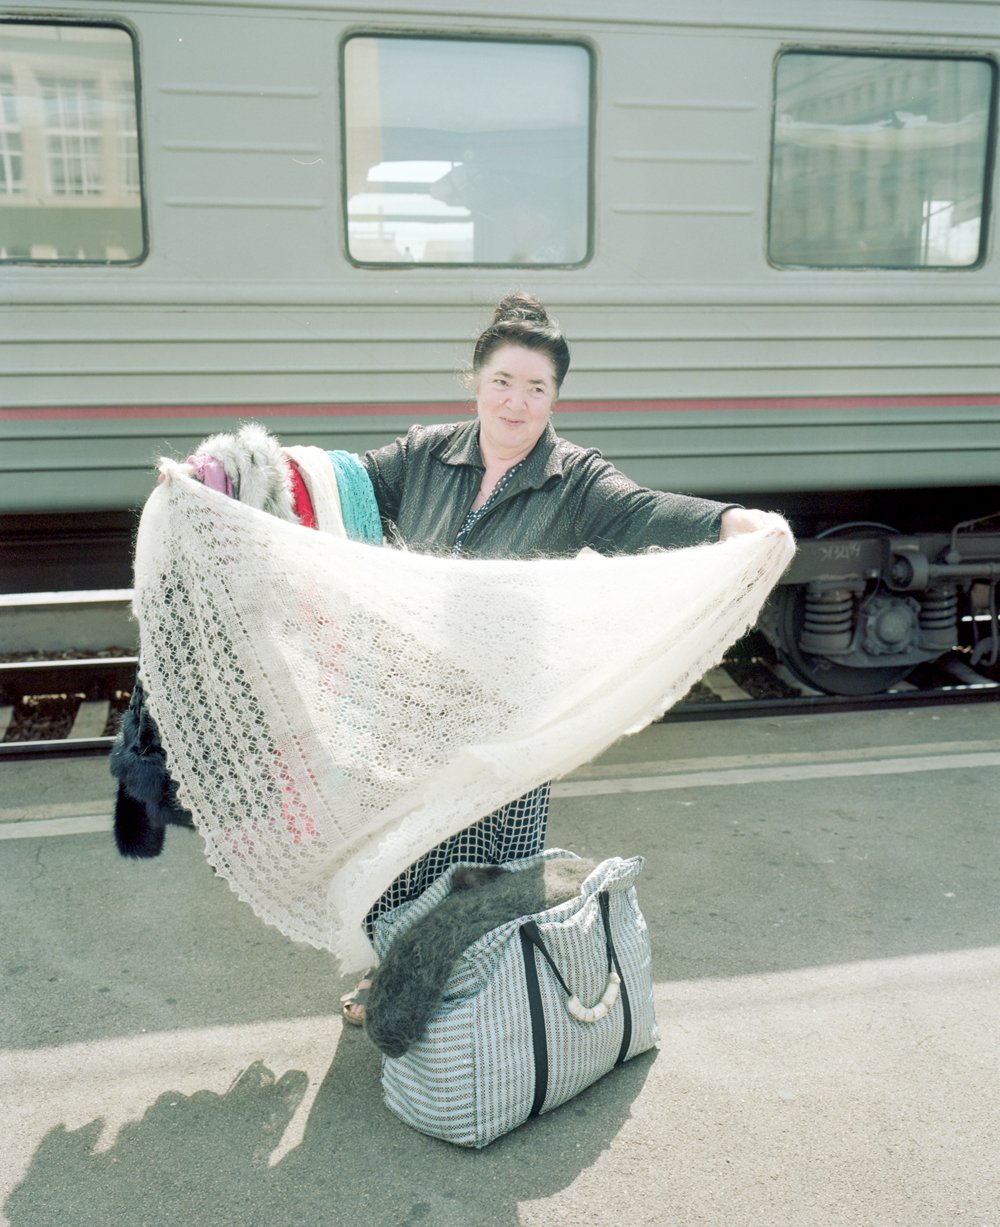 Trans-Siberian railway: I quit my job after an unforgettable trip across Russia